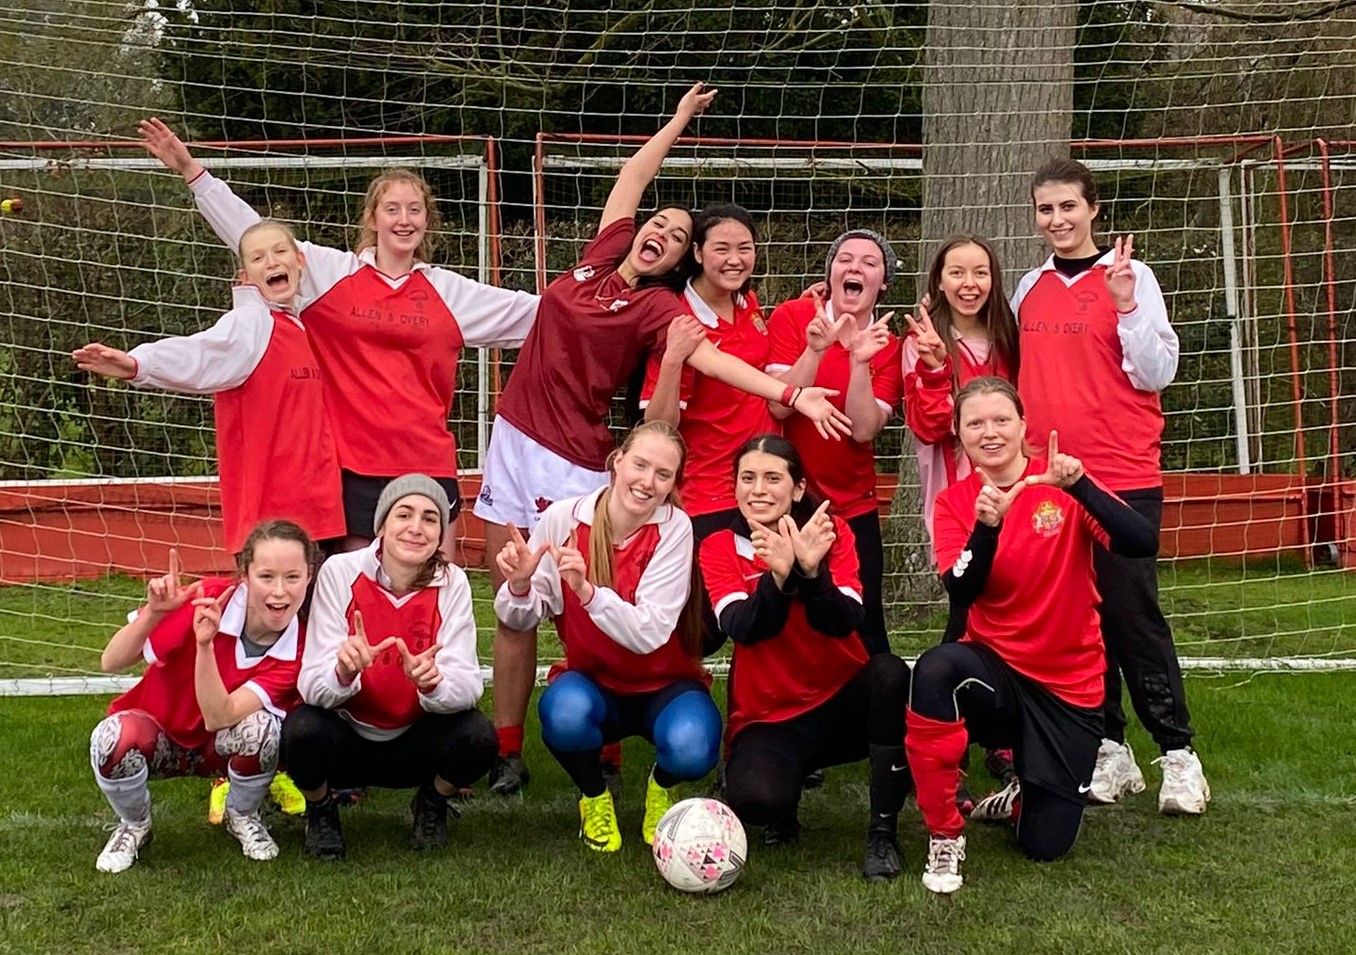 St John's and King's combined women's football team